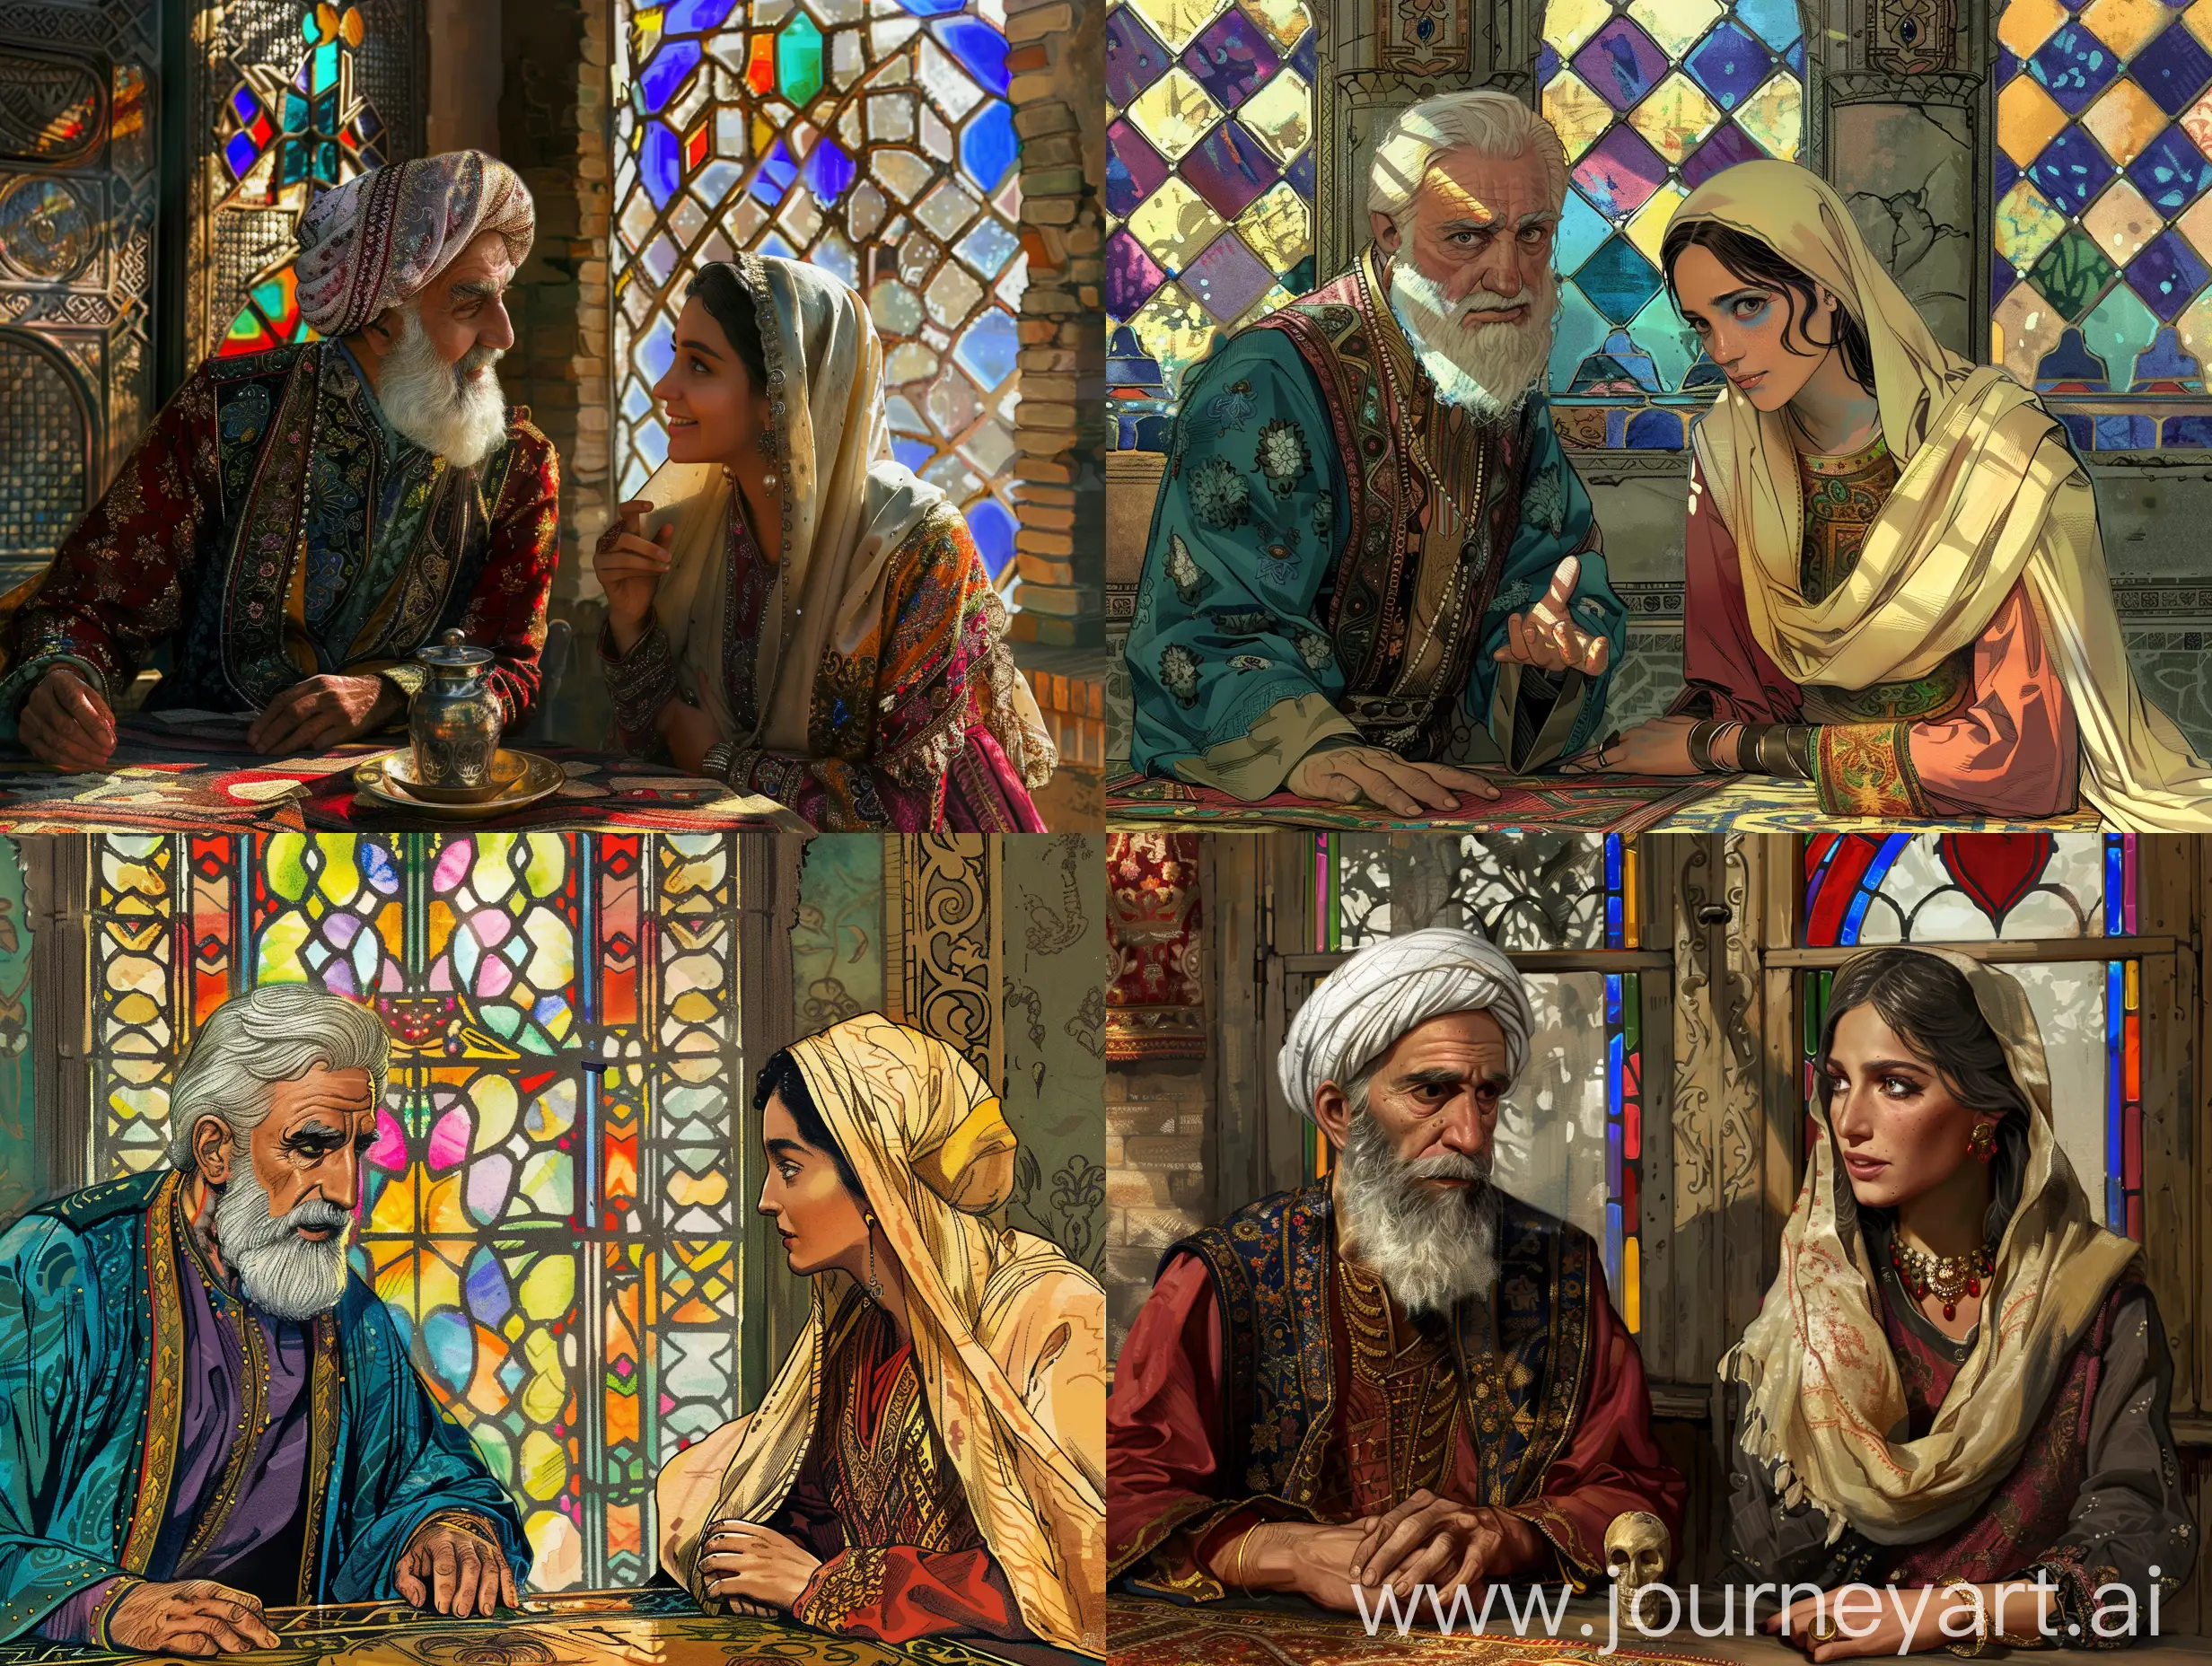 Persian-Man-and-Woman-in-Traditional-Attire-Conversing-in-Old-Persian-Room-with-Stained-Glass